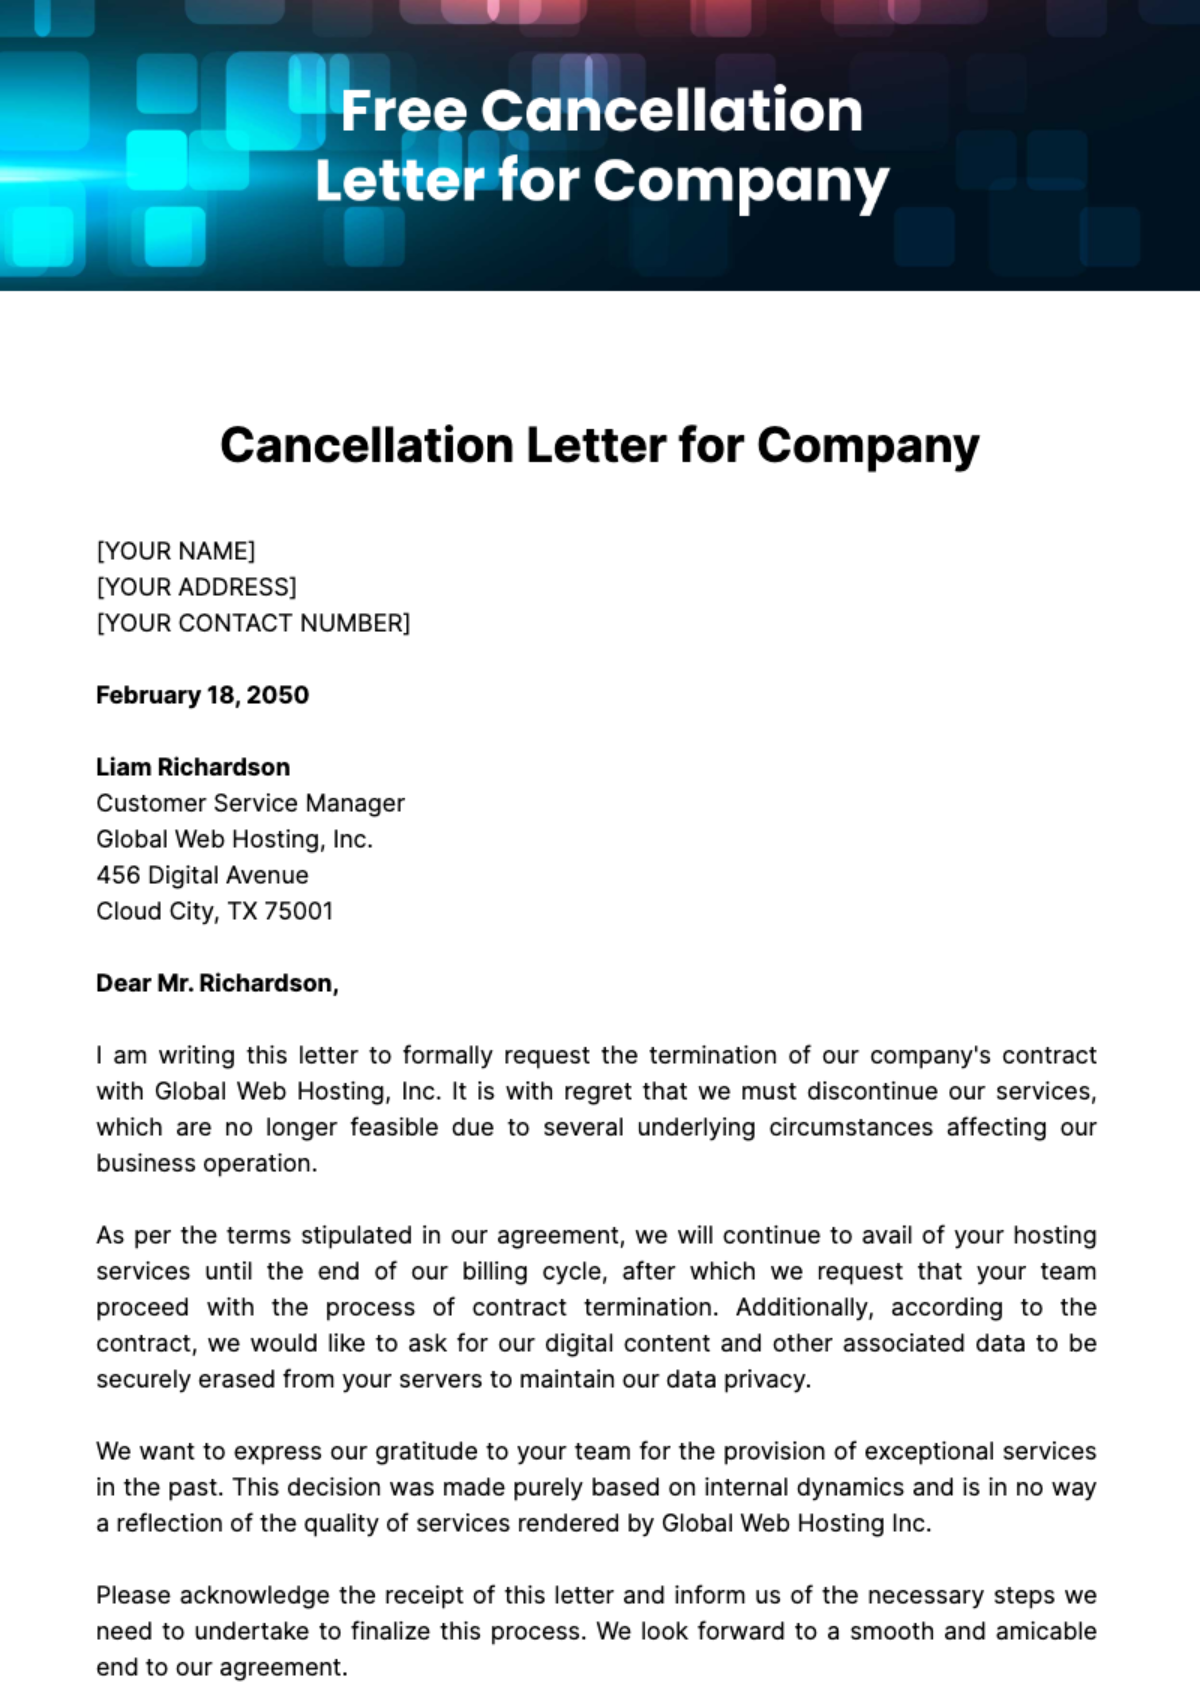 Free Cancellation Letter for Company Template